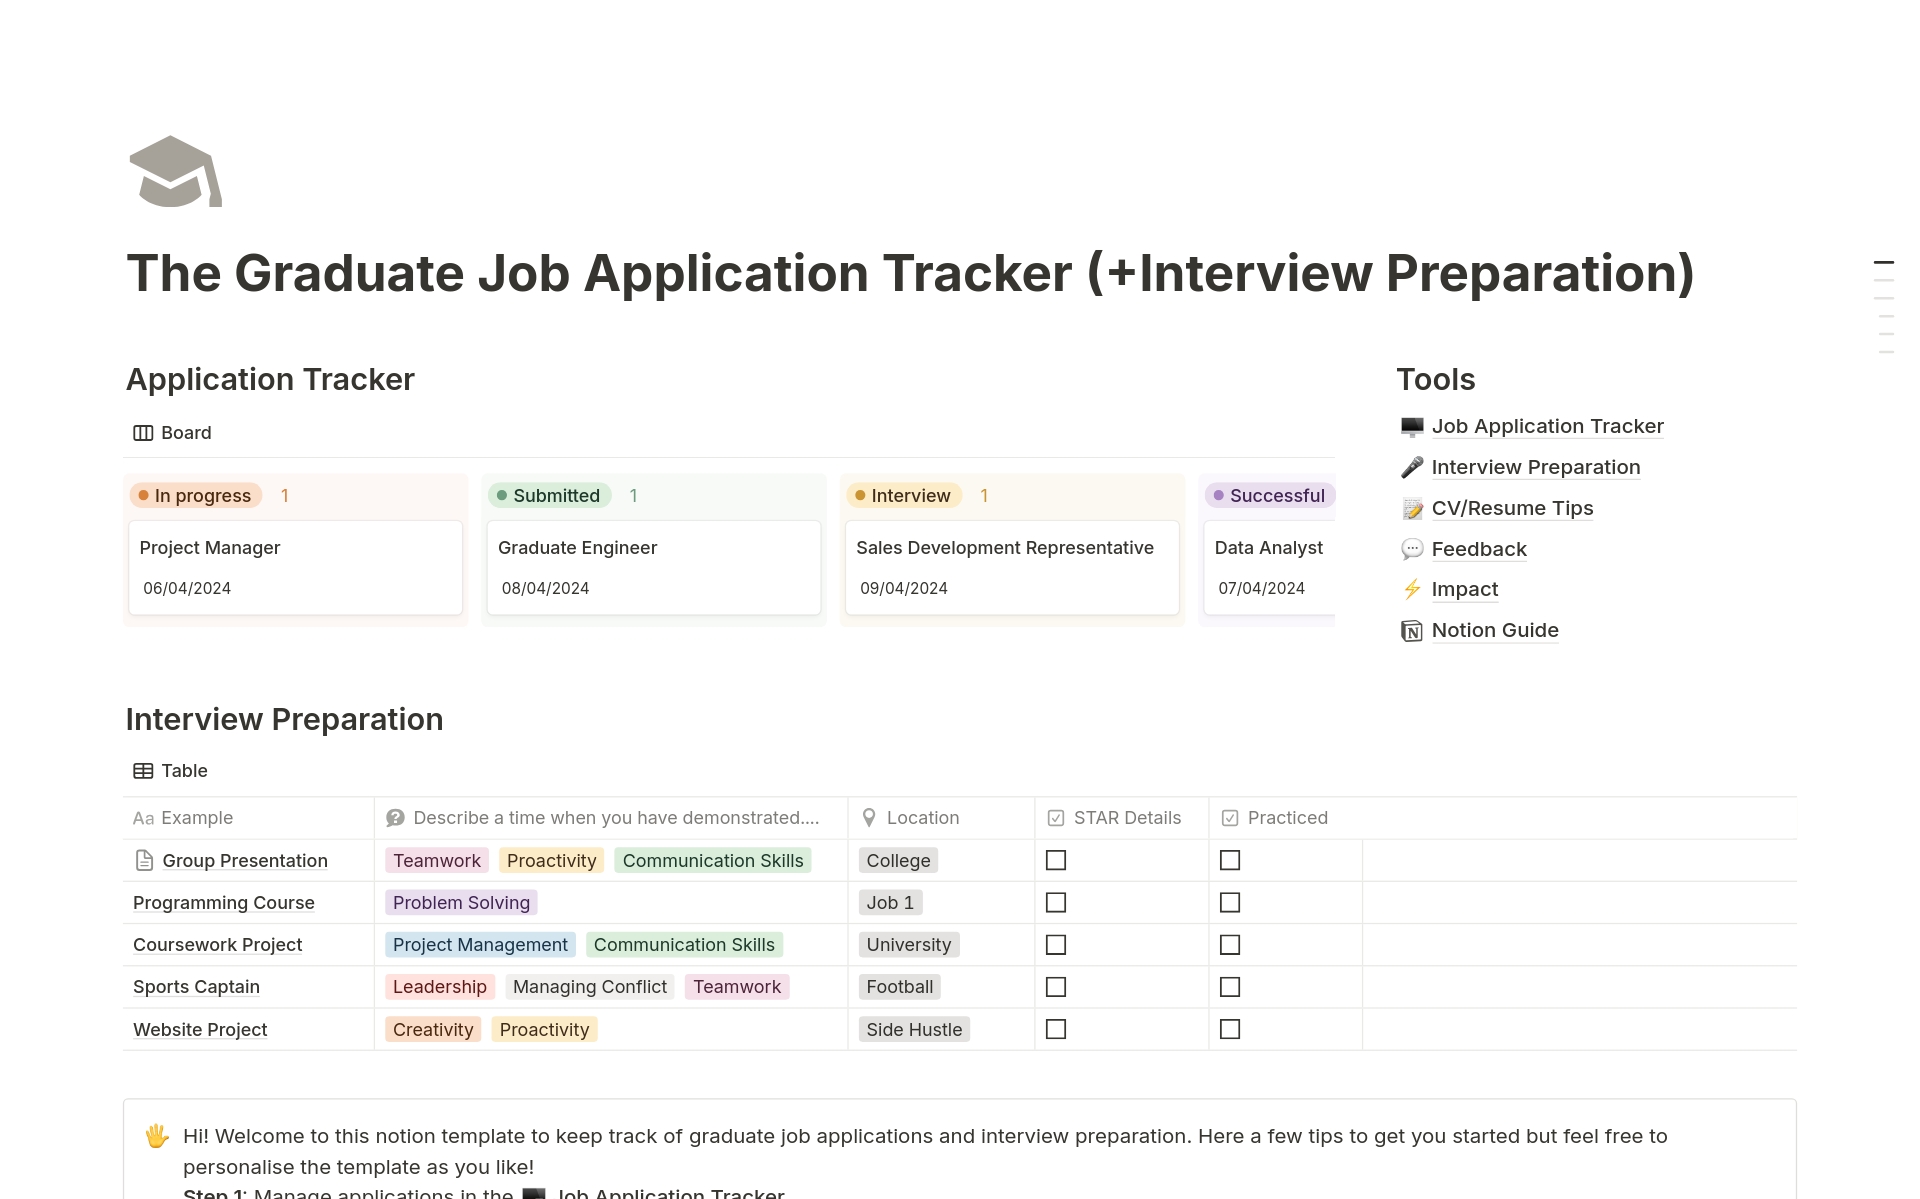 Versatile application tracker and interview preparation template for students and graduates.